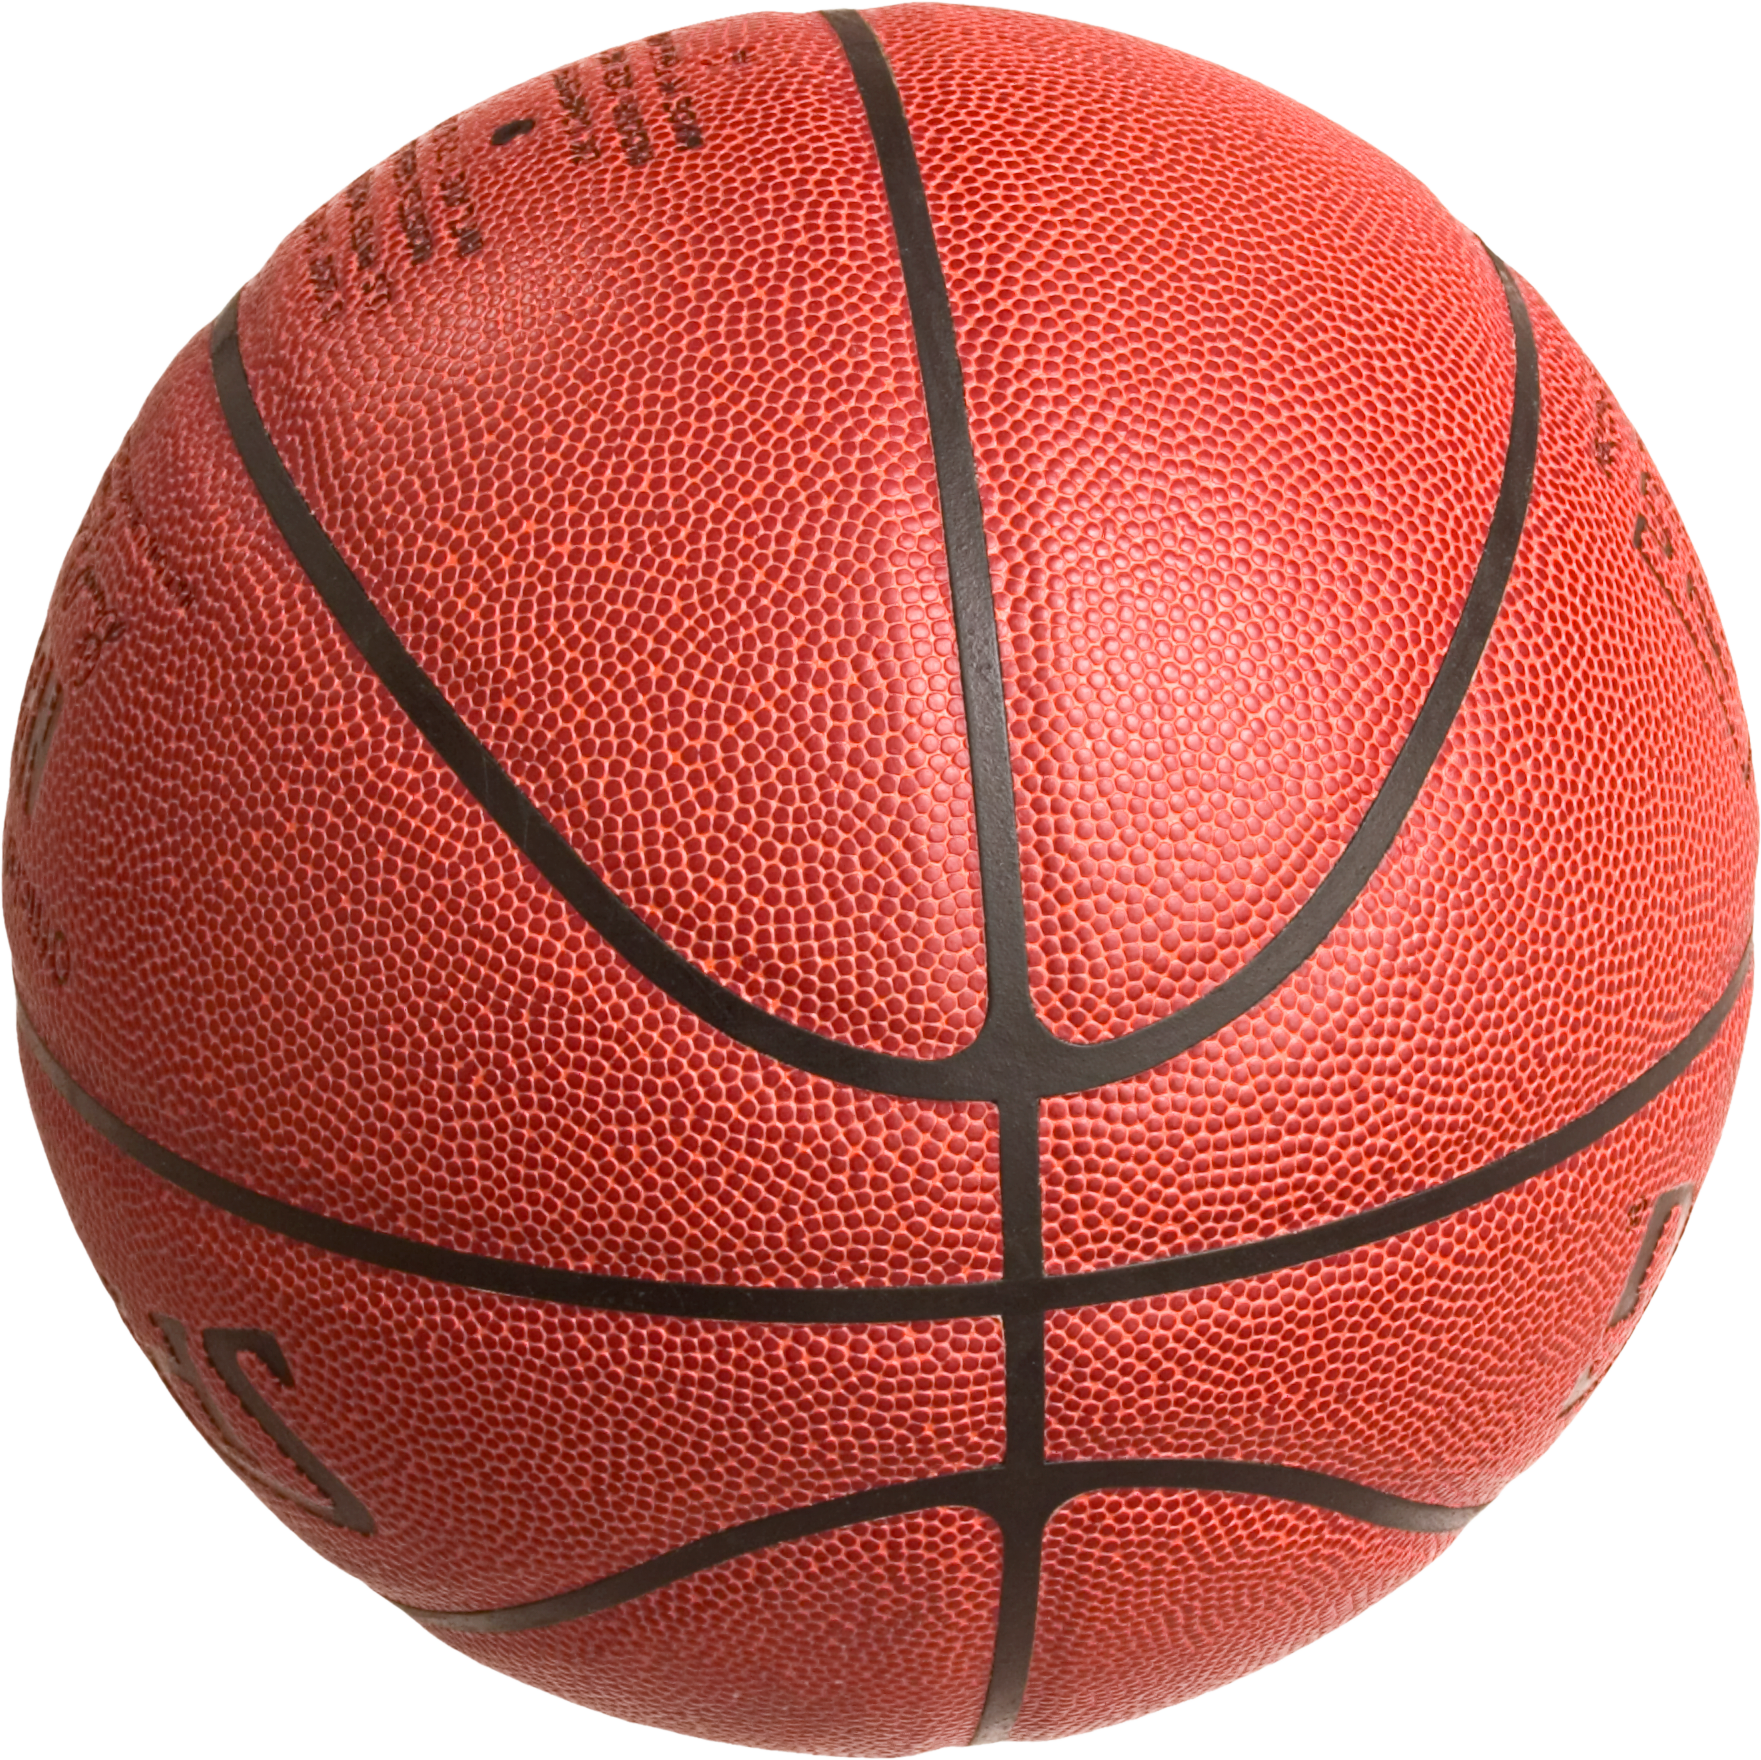 Transparent pictures free icons. Basketball png images